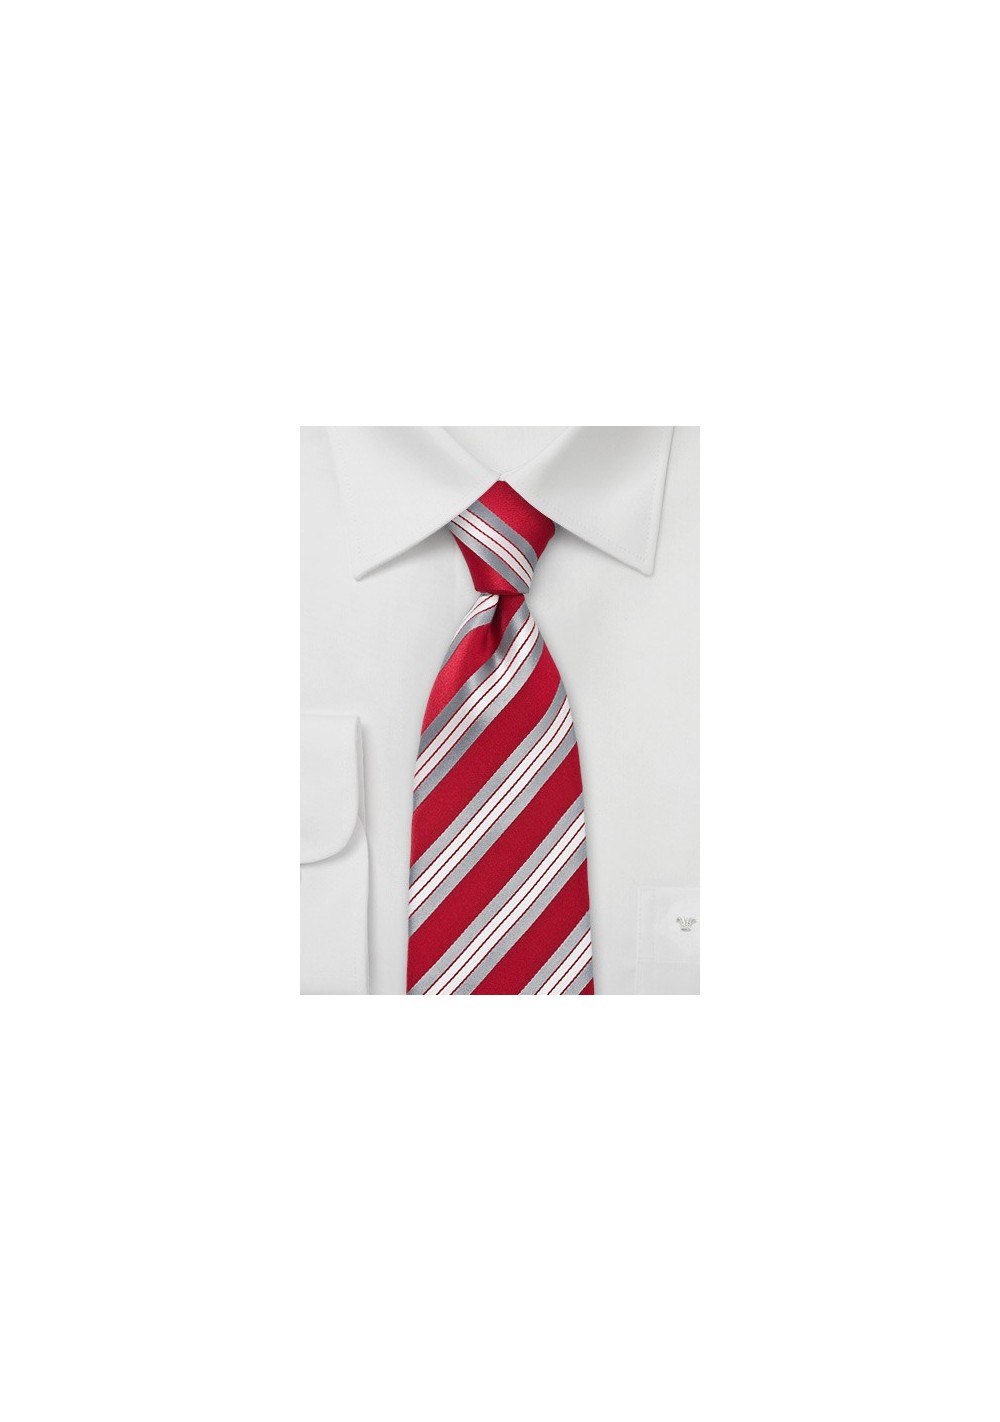 Vibrant Red and Silver Striped Tie